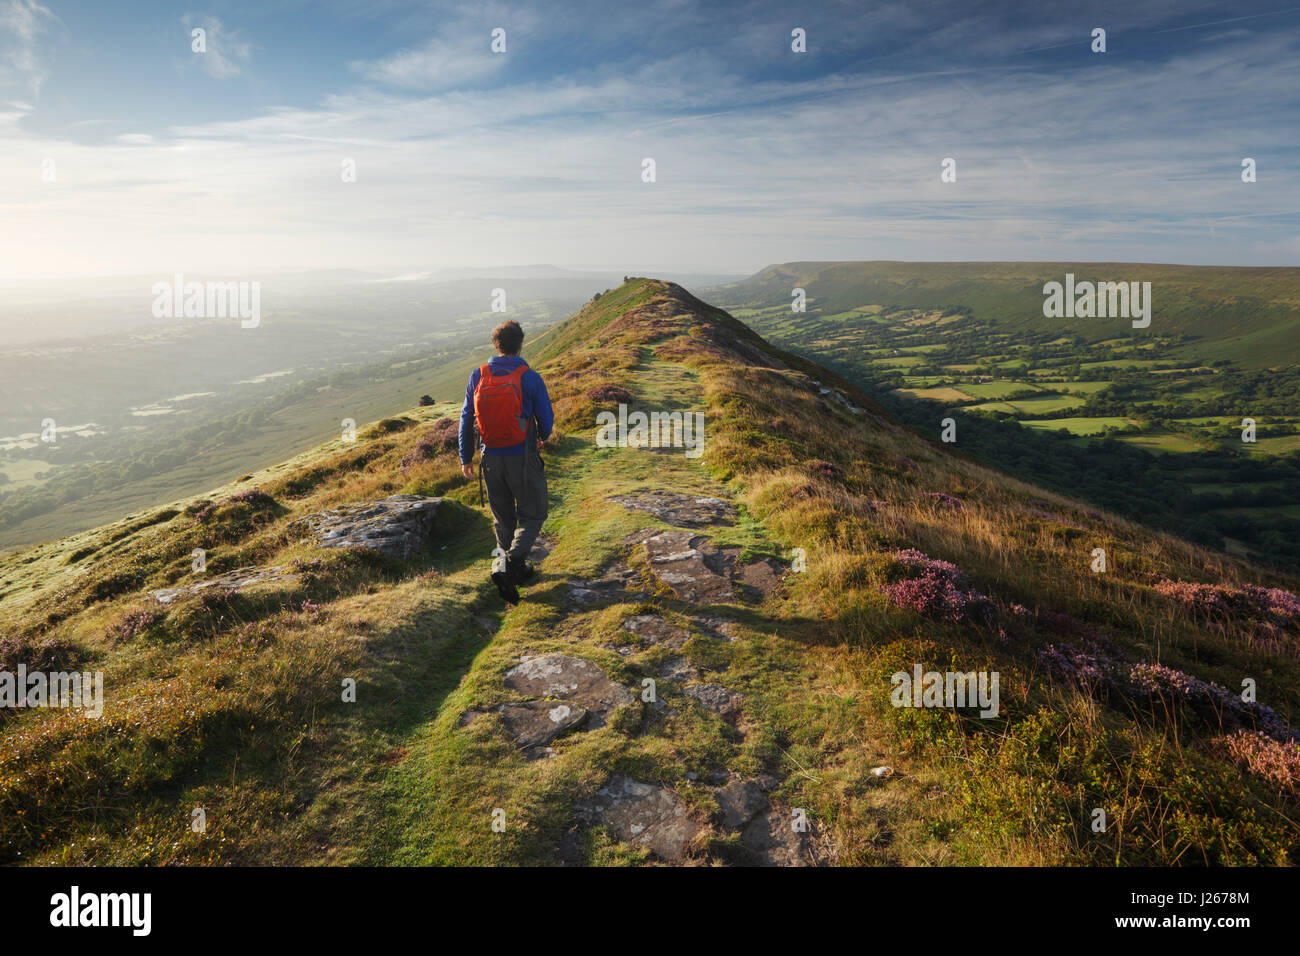 Hillwalker on Black Hill in the Black Mountains. Brecon Beacons National Park, Wales, UK. Stock Photo